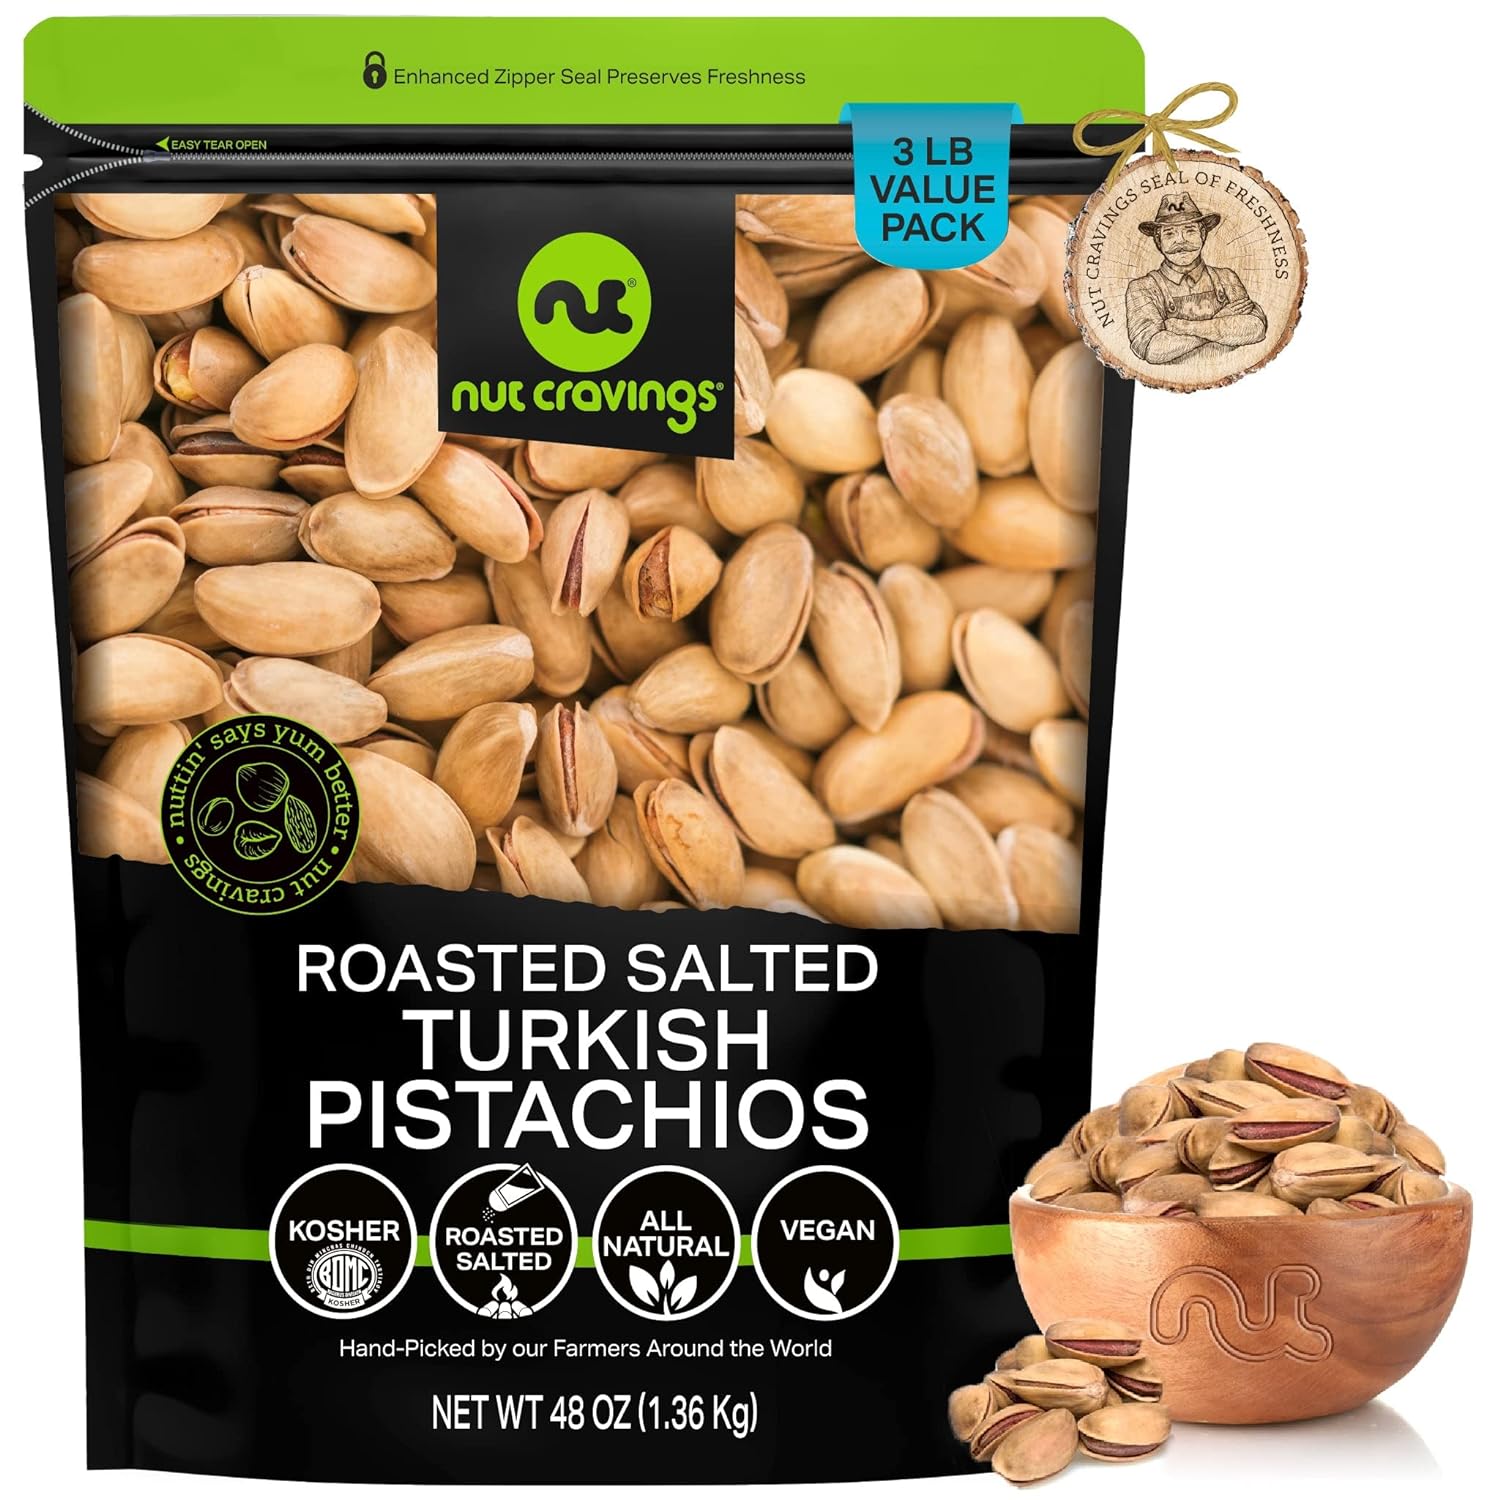 Nut Cravings - Roasted & Lightly Salted Turkish Pistachios Antep (48oz - 3 LB) Packed Fresh in Resealable Bag - Nut Snack - Healthy Protein Food, All Natural, Keto Friendly, Vegan, Kosher